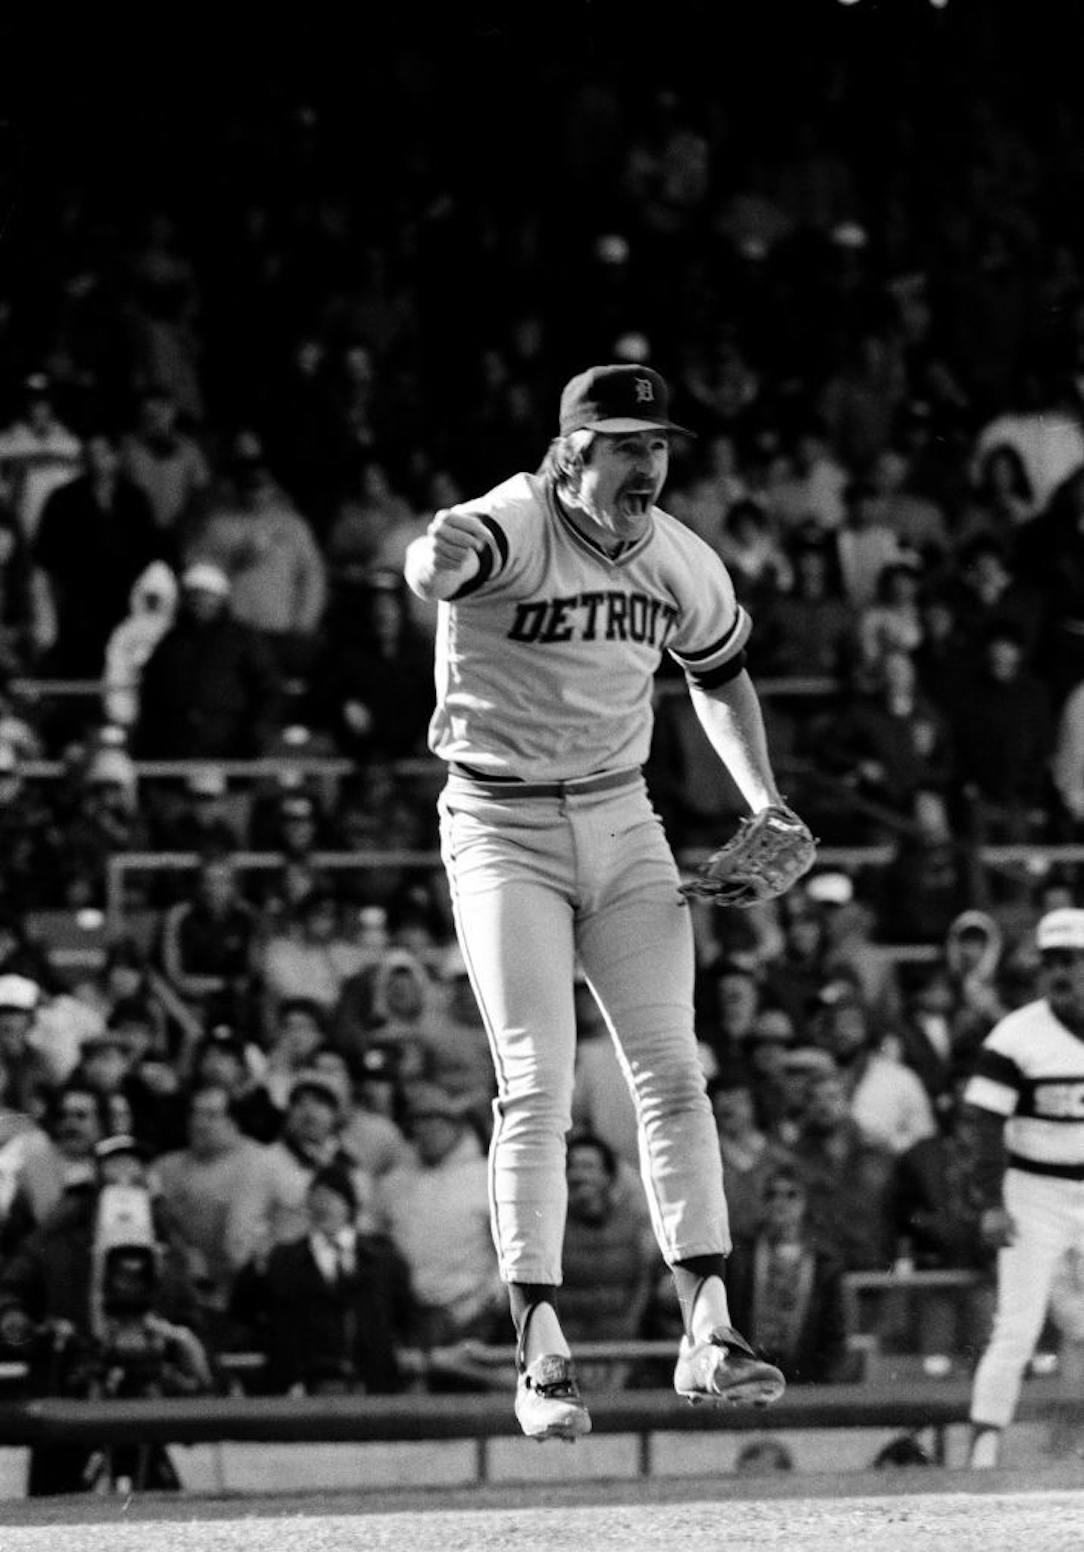 2018 Baseball Hall of Fame: Detroit Tigers' Alan Trammell and Jack Morris  to be inducted